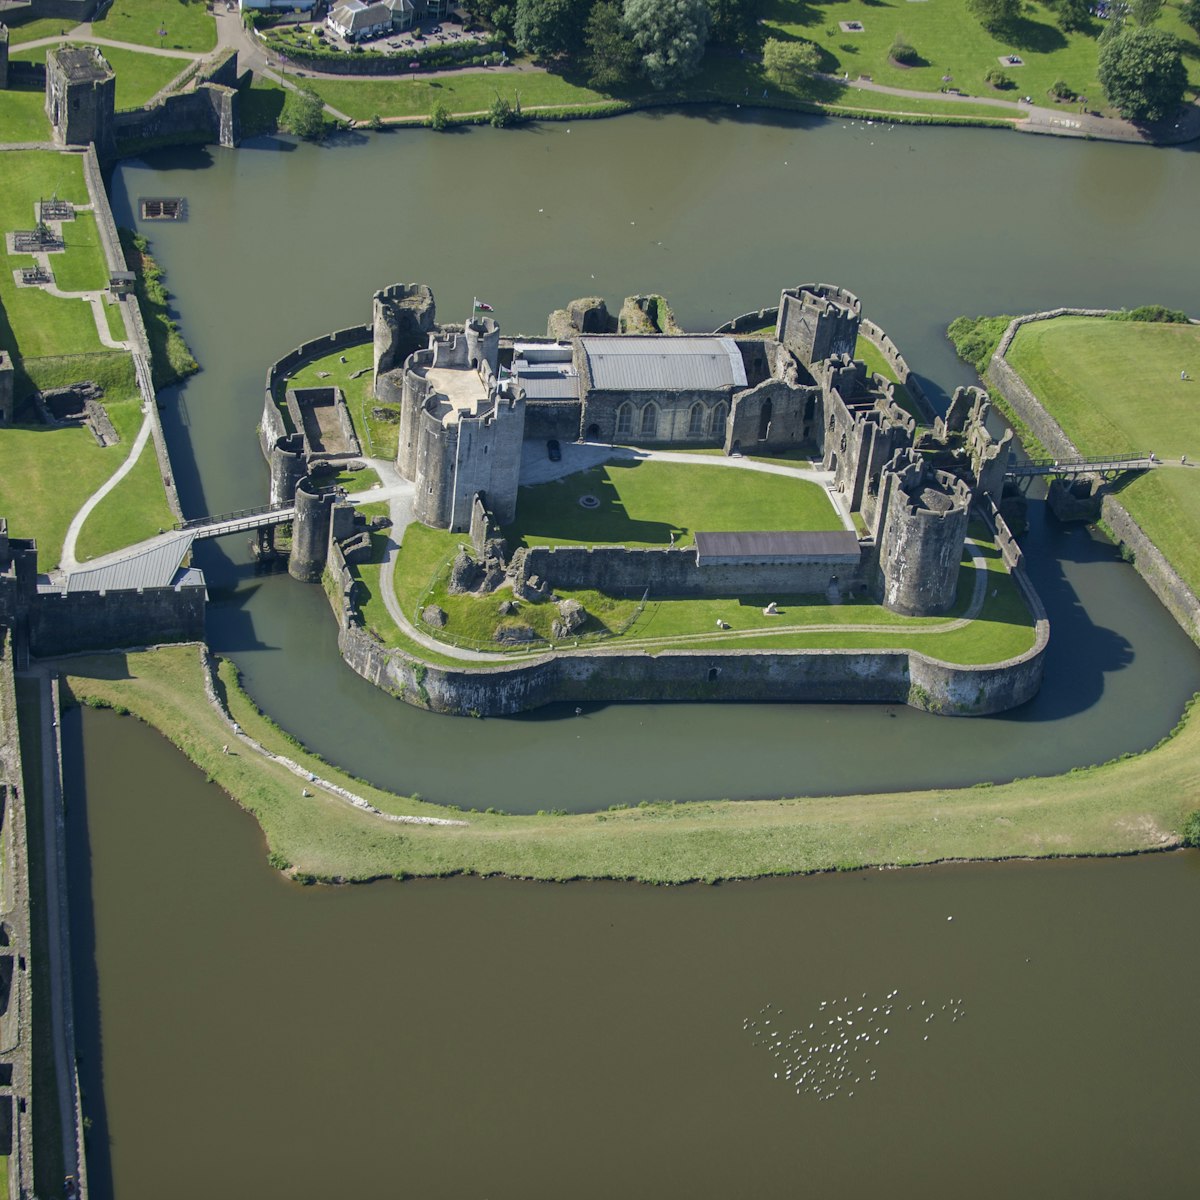 Caerphilly Castle, Caerphilly, Glamorgan, Wales